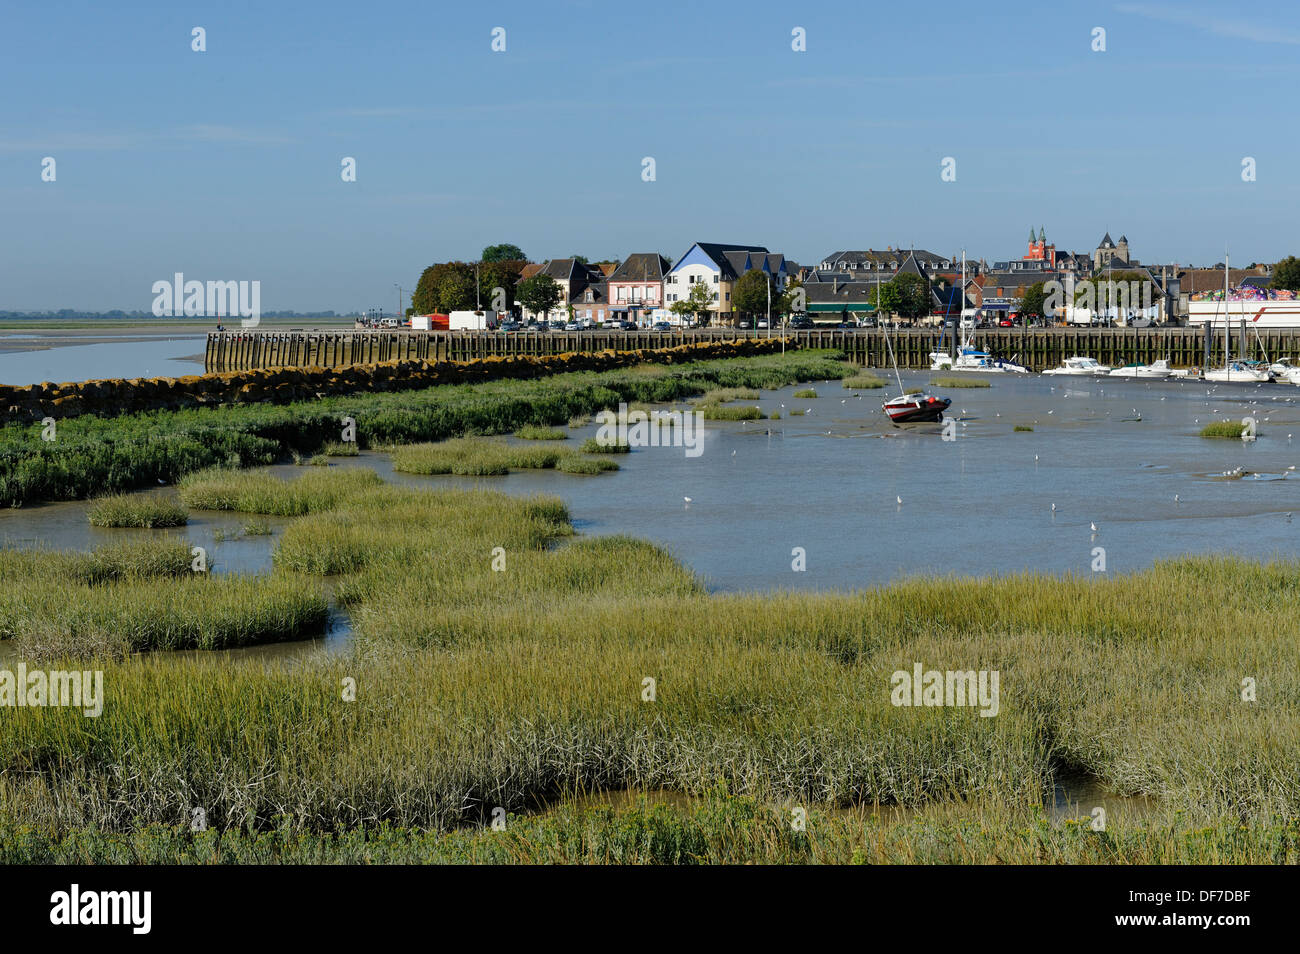 Port in Le Crotoy at the mouth of the Somme River, Le Crotoy, Département Somme, Picardie, France Stock Photo